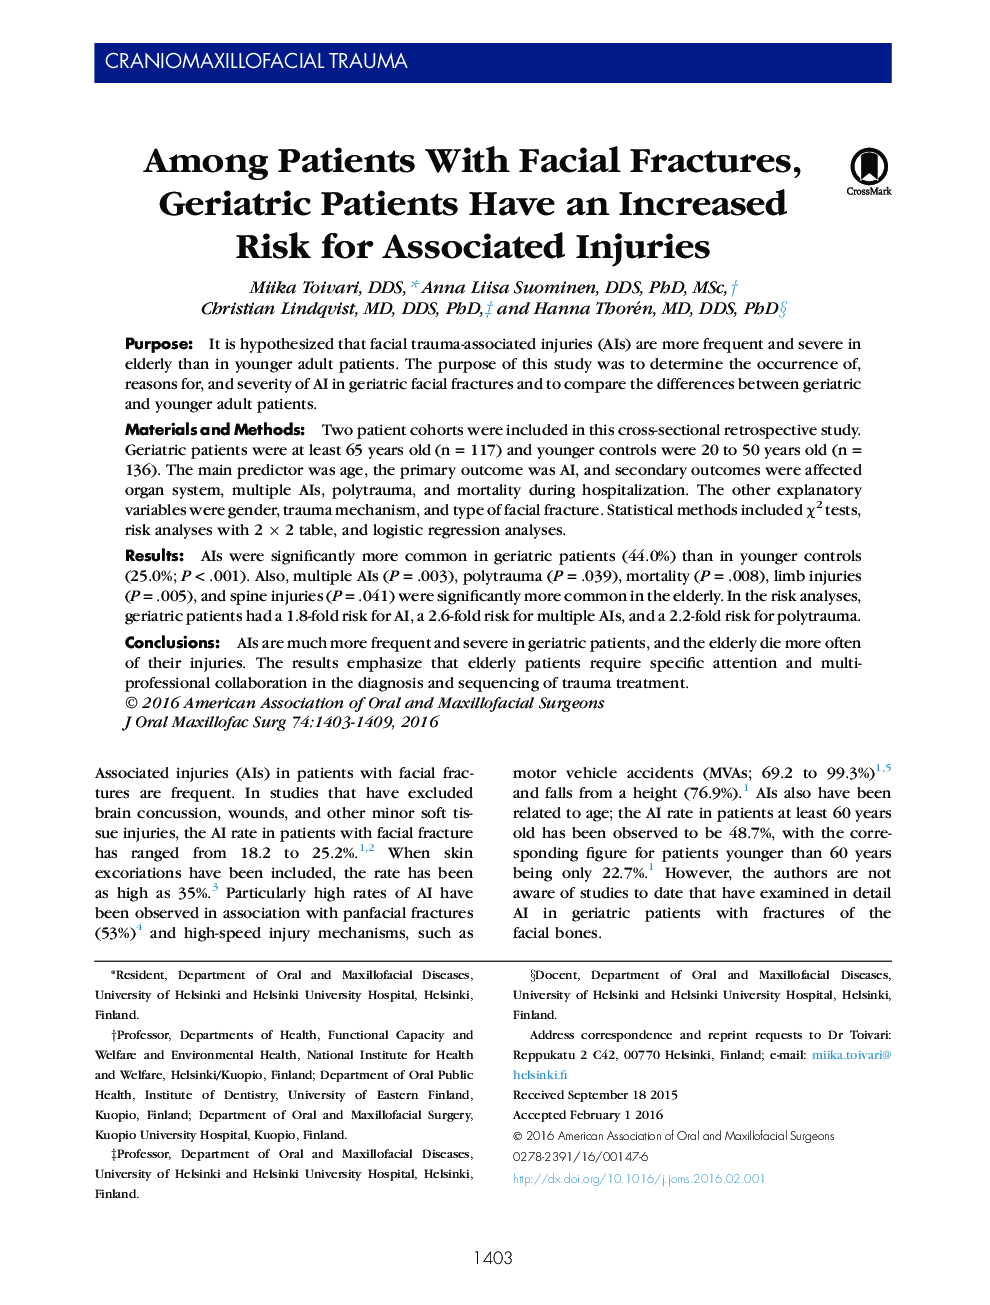 Among Patients With Facial Fractures, Geriatric Patients Have an Increased Risk for Associated Injuries